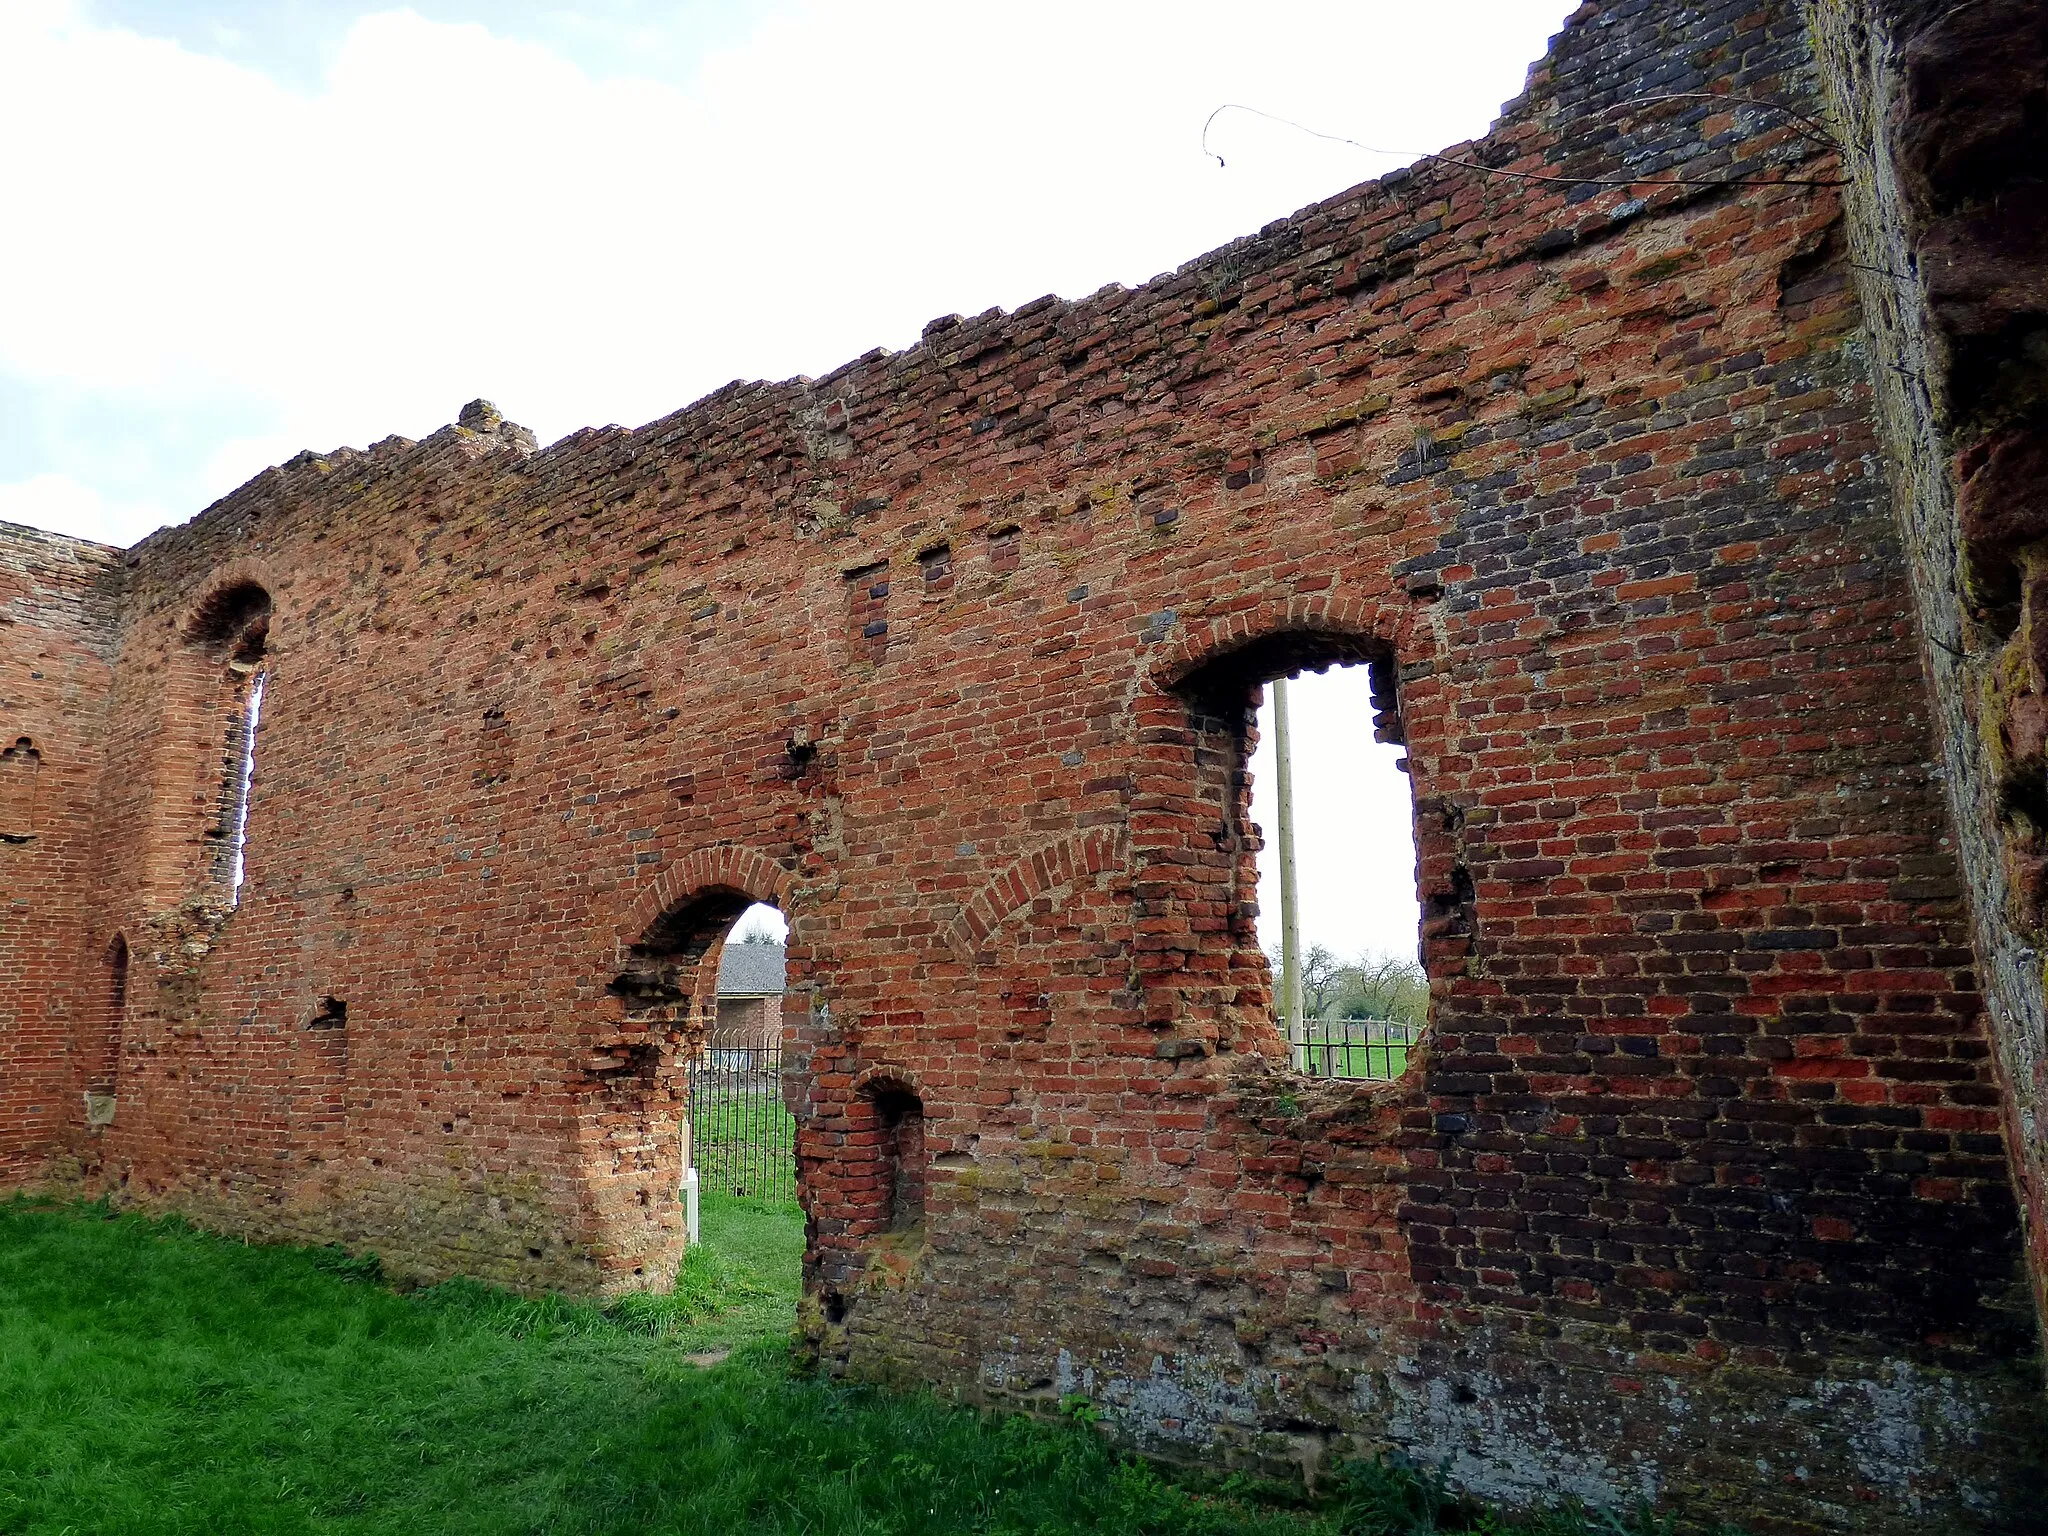 Photo showing: Someries Castle, Hyde, Bedfordshire. All that remains of this site are the gatehouse (incorportaing a chapel and lodge) - the rest is earthworks and the whole site is a scheduled ancient monument (not a listed building). The name of it comes from William de Somery (of Dudley), whose residence stood here in the 13th century, but the building could not have been described as a "castle". It is one of the earliest brick buildings in England.

GOC Hertfordshire's walk on 14 April 2018. This was a 9.8-mile circular walk in and around the villages and hamlets of Breachwood Green, Colemans Green, Darleyhall and Wandon End in Hertfordshire; Someries and Chiltern Green in Bedfordshire; and Peter's Green, Perry Green and Bendish, back in Hertfordshire. I led the walk, which was attended by 13 people (including me). You can view my other photos of this event, find out more about the Gay Outdoor Club or see my collections.